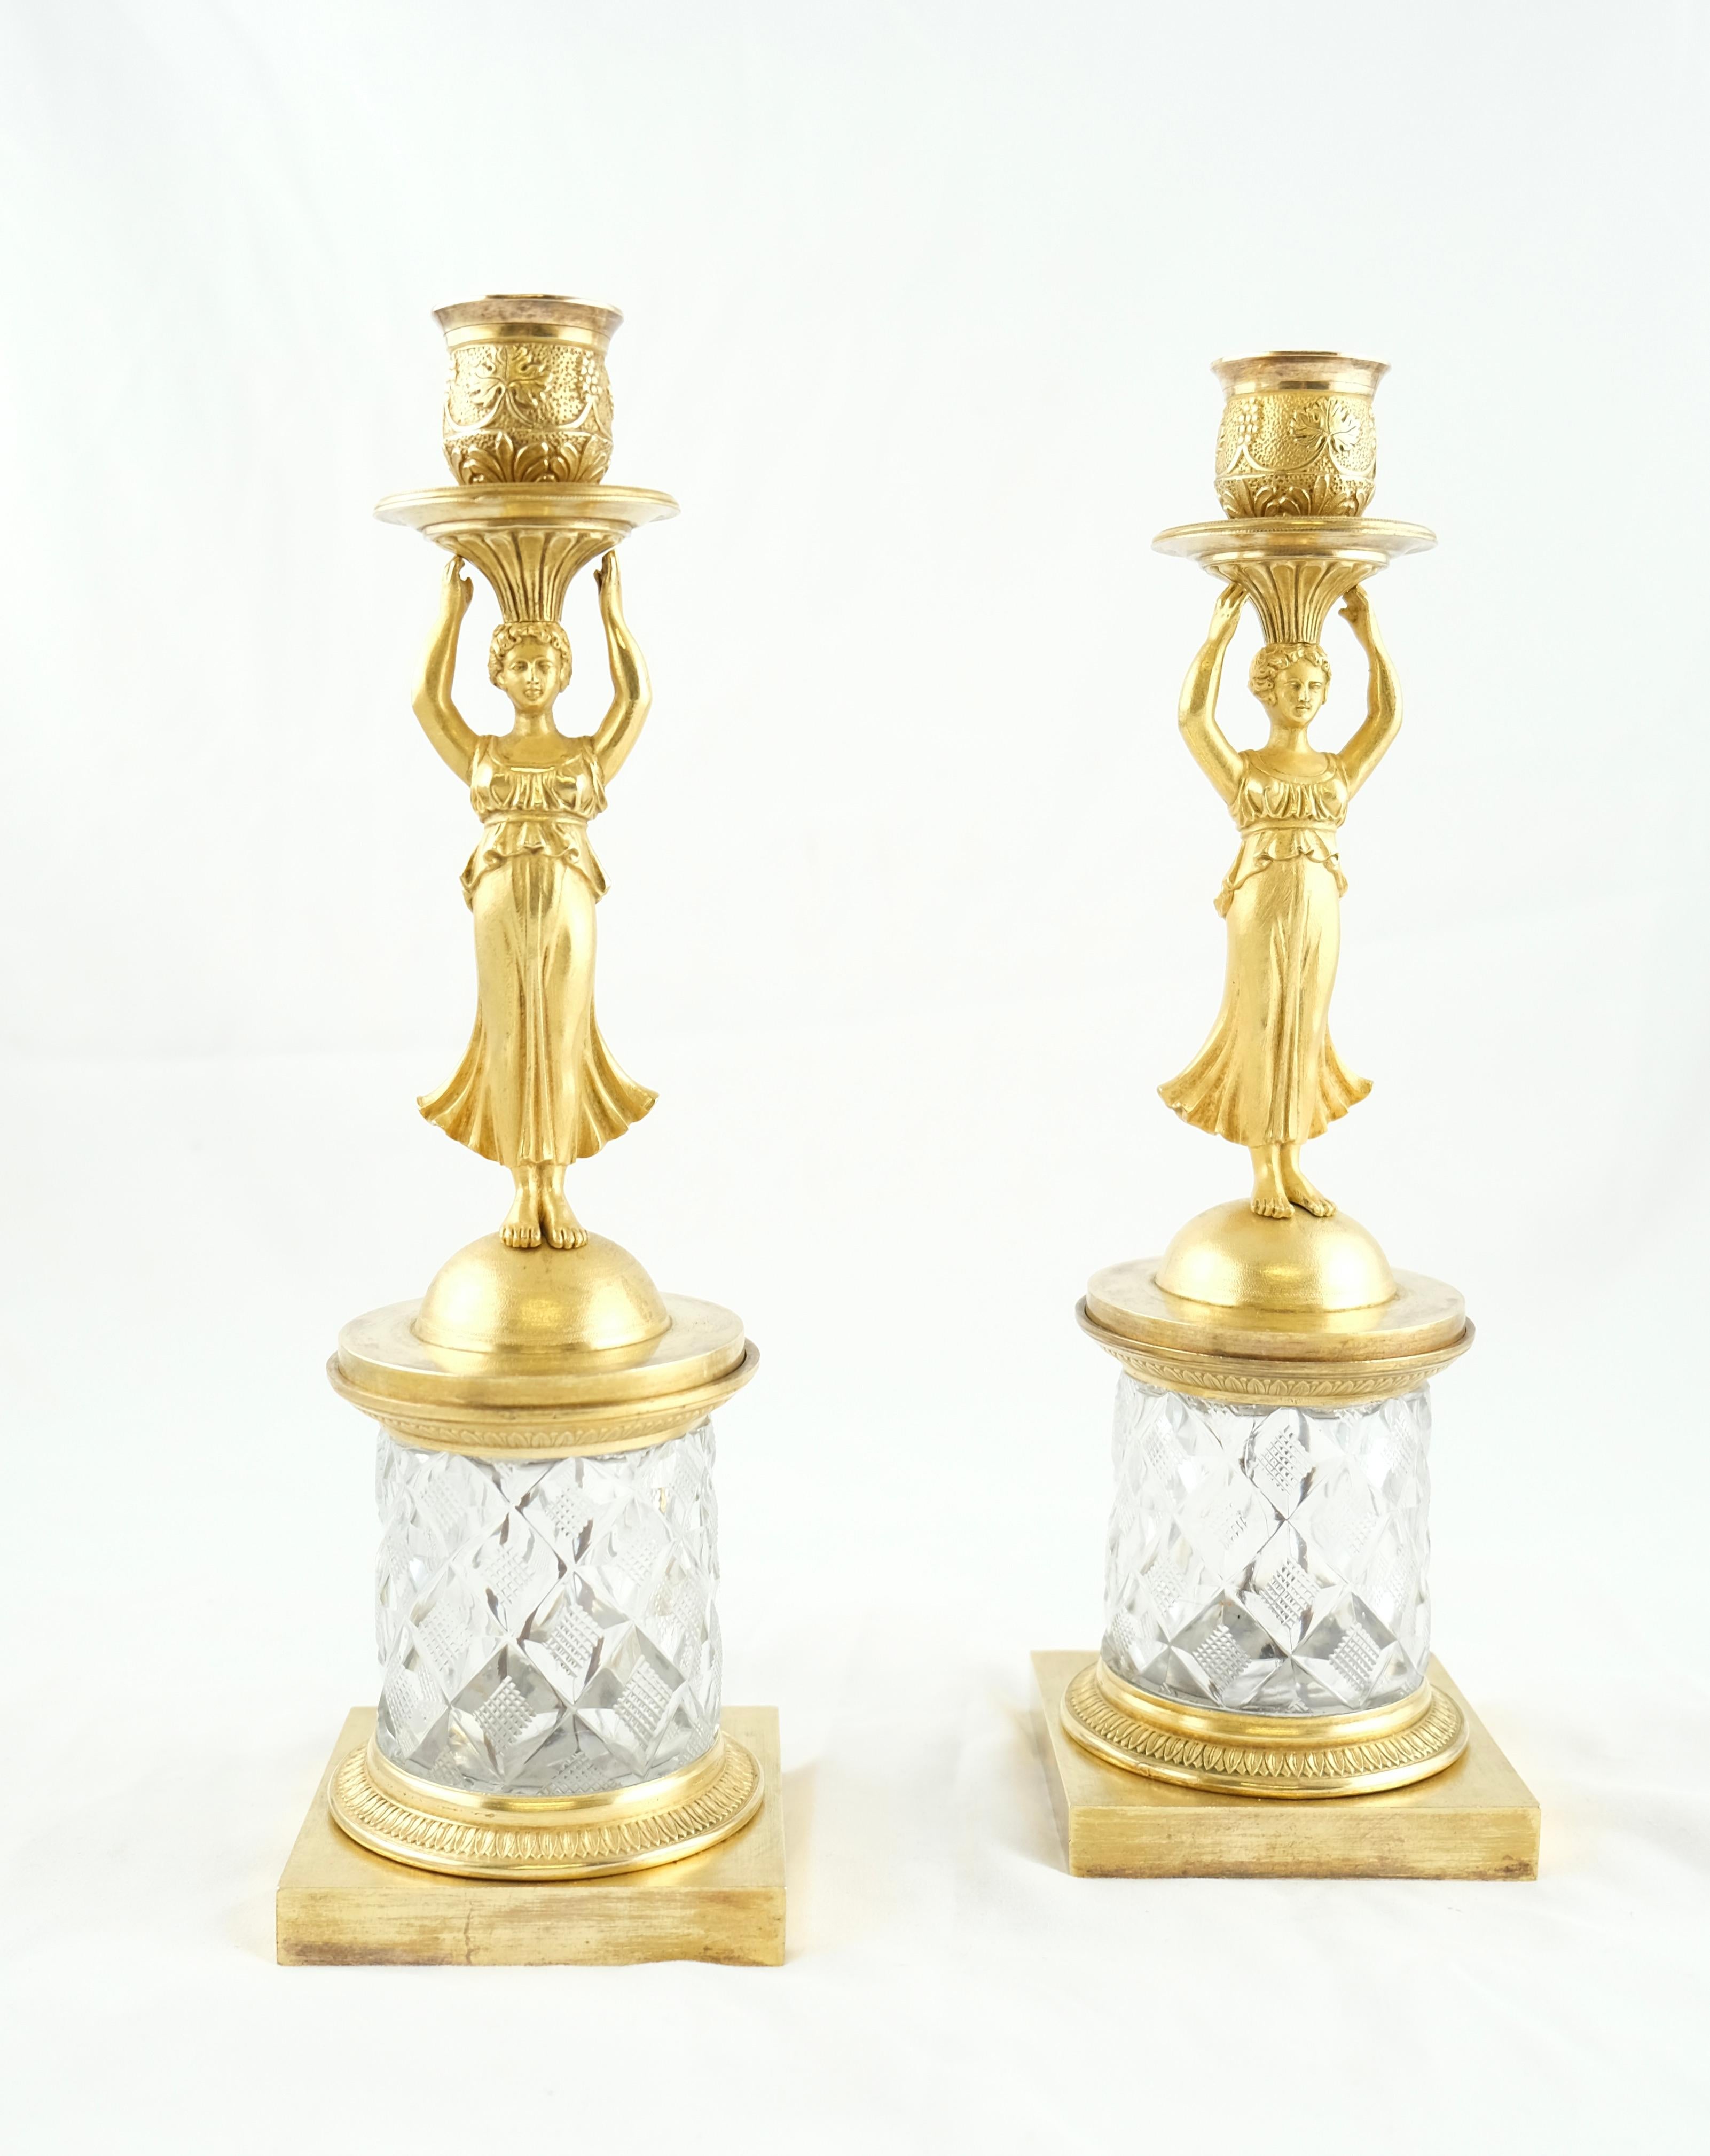 A charming pair of candlesticks. Most of the candlesticks made during this period, Louis XVl, Directoire and Empire used bronze that were either gilt or dark-patinated. These candlesticks have bases of cut crystal which makes them rare and gives